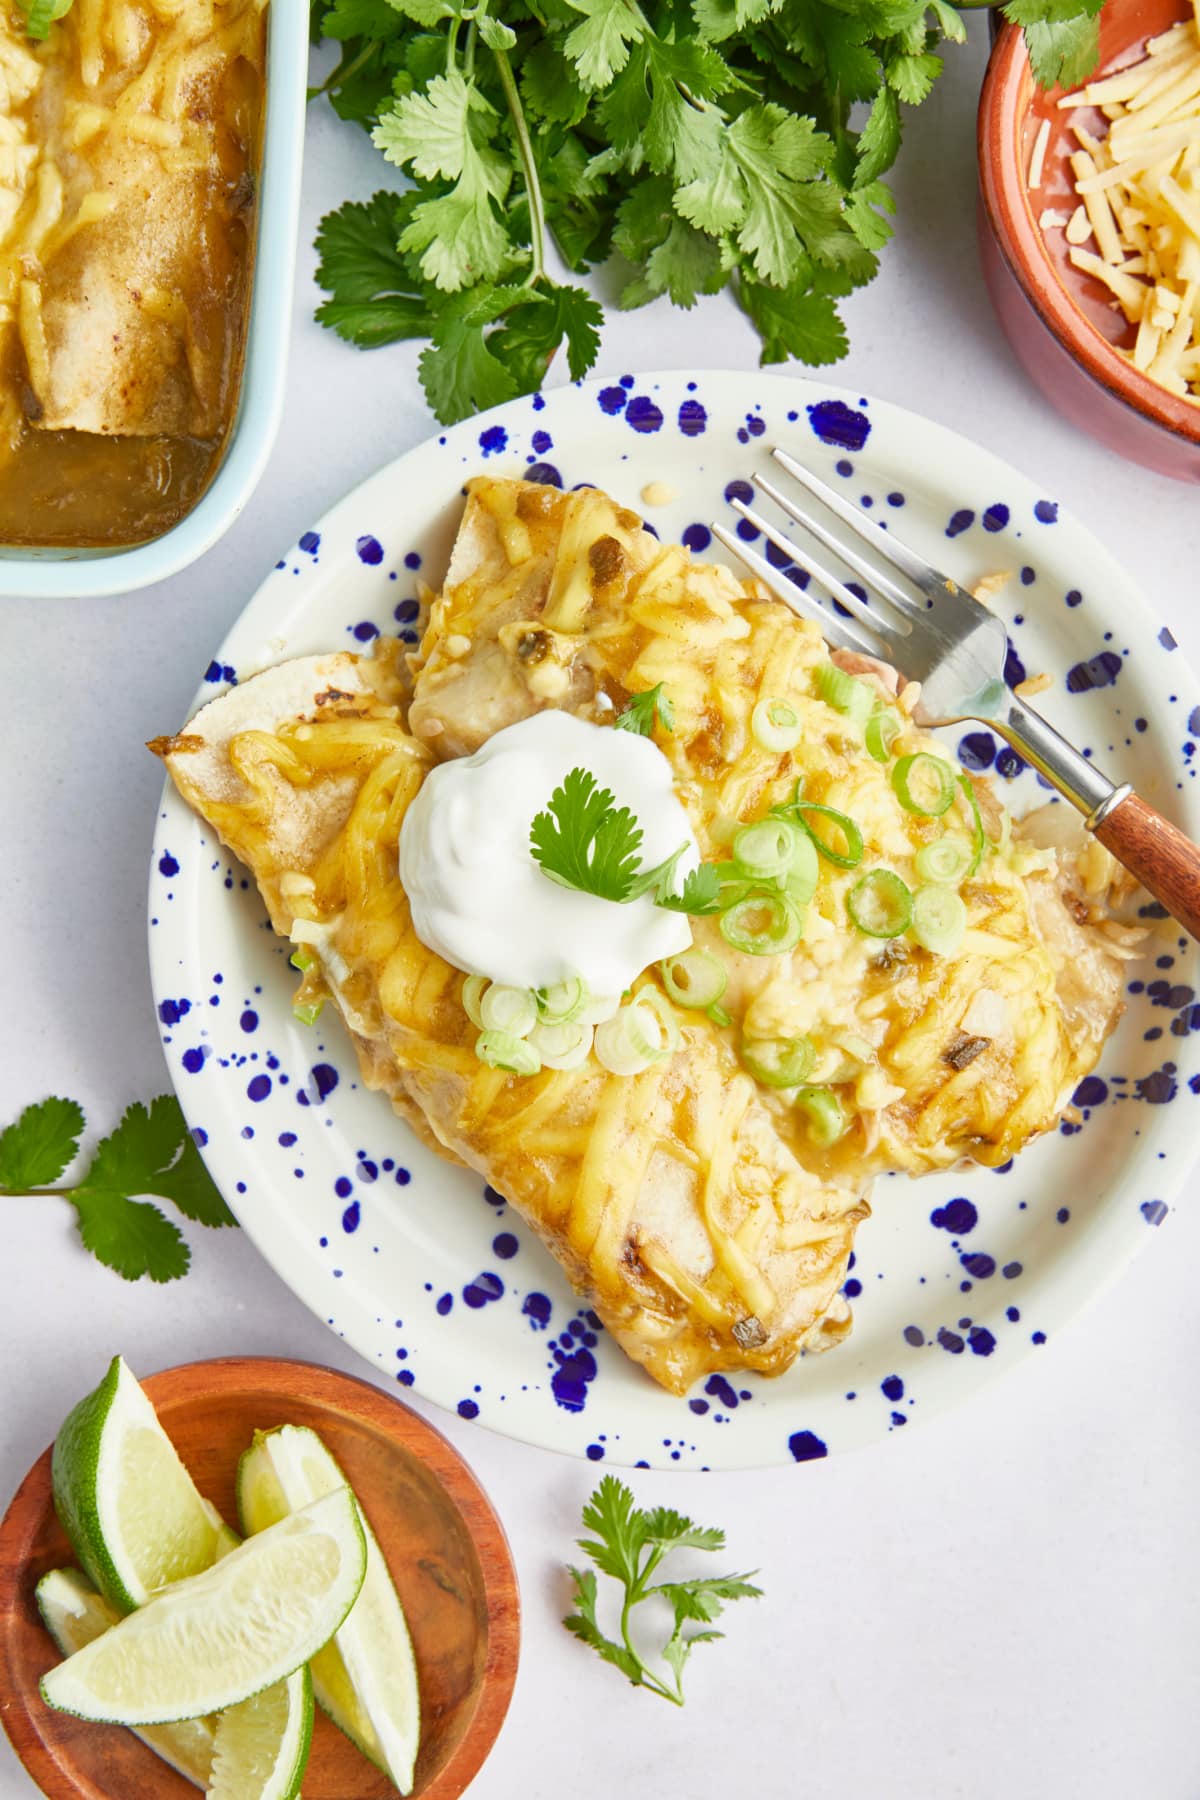 Overhead view of two dairy free enchiladas on a plate, garnished with sour cream, sliced green onions, and parsley. Sitting on the side is a bowl of lime wedges, a bowl of shredded cheese, more parsley, and the baking dish of enchiladas.